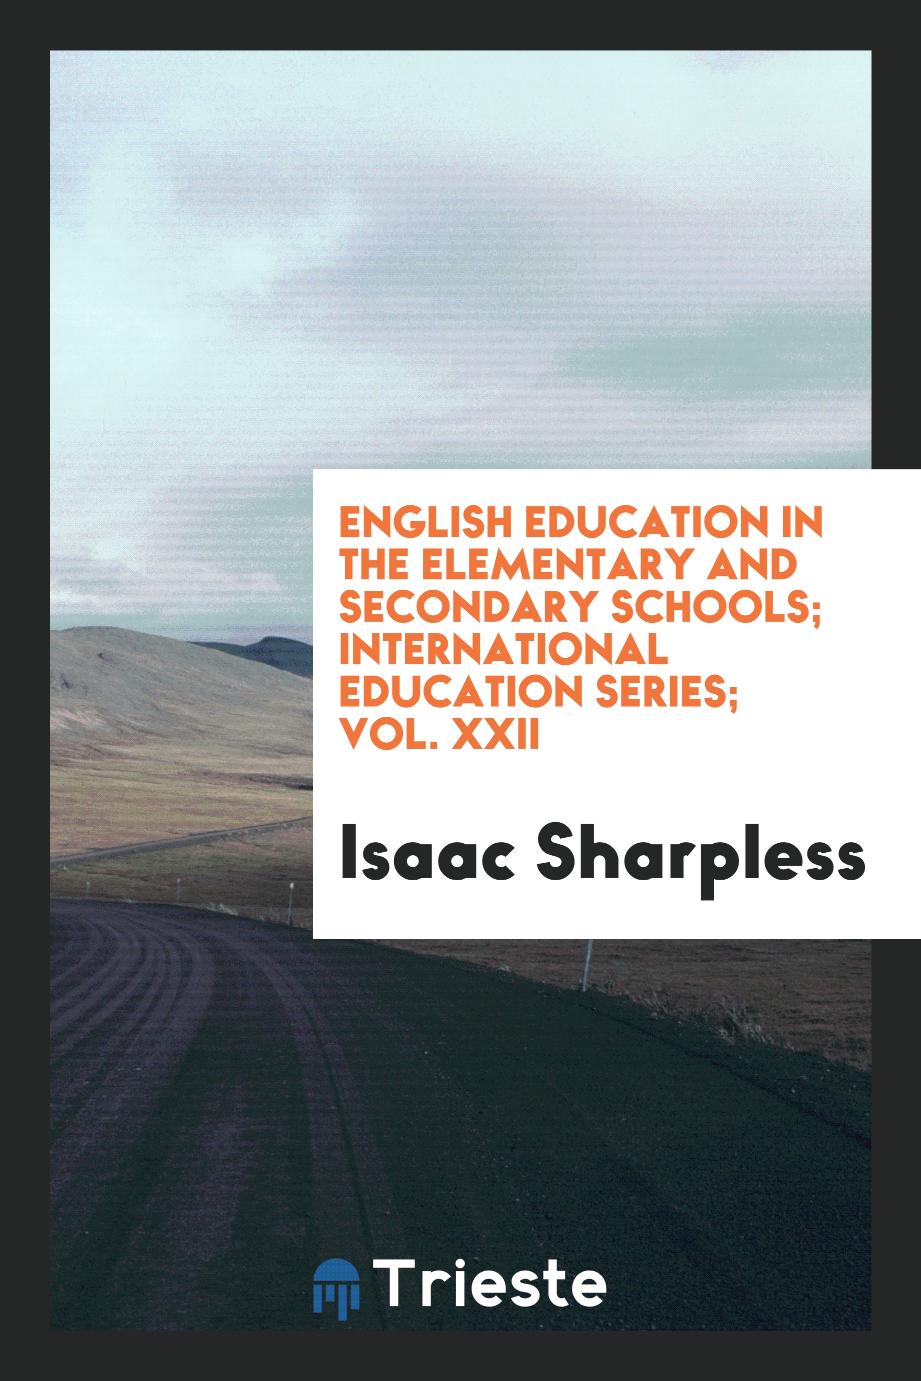 English education in the elementary and secondary schools; International education series; Vol. XXII